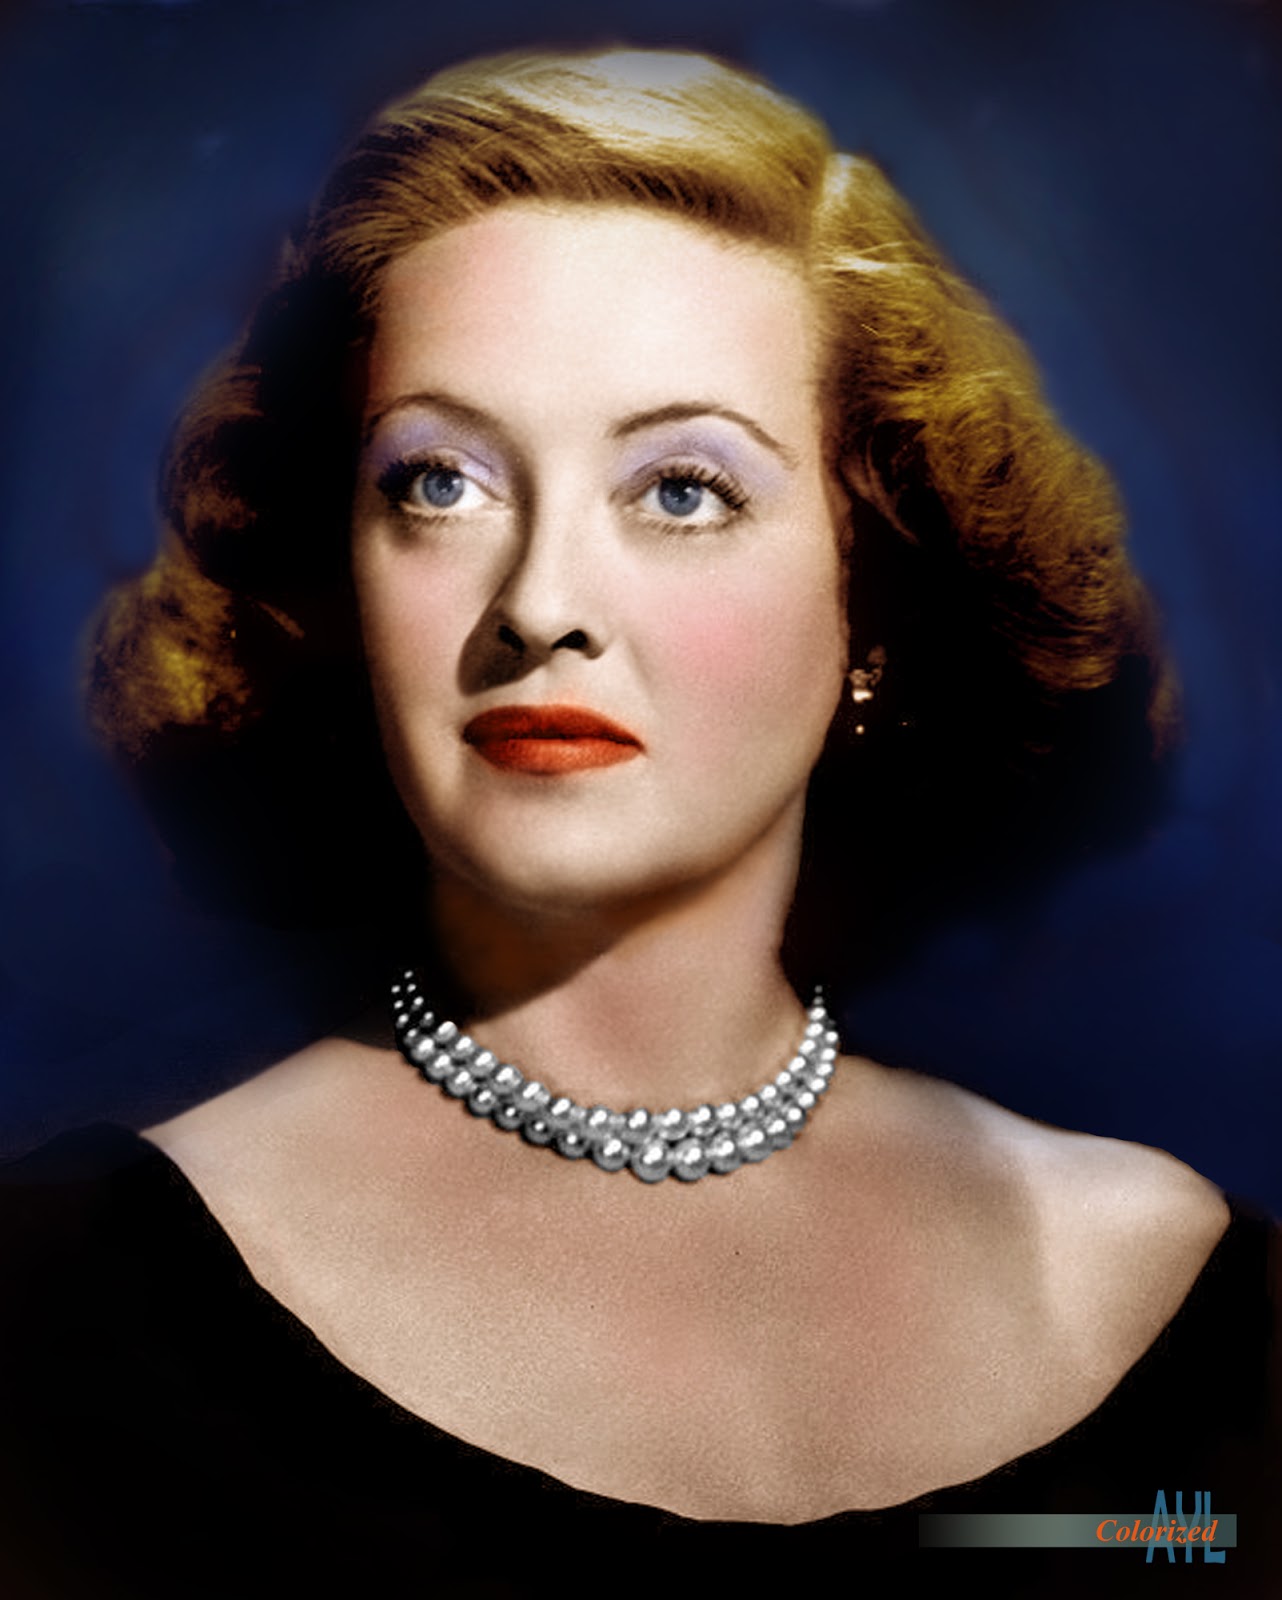 Bette Davis in the late 1940s and early 50s.